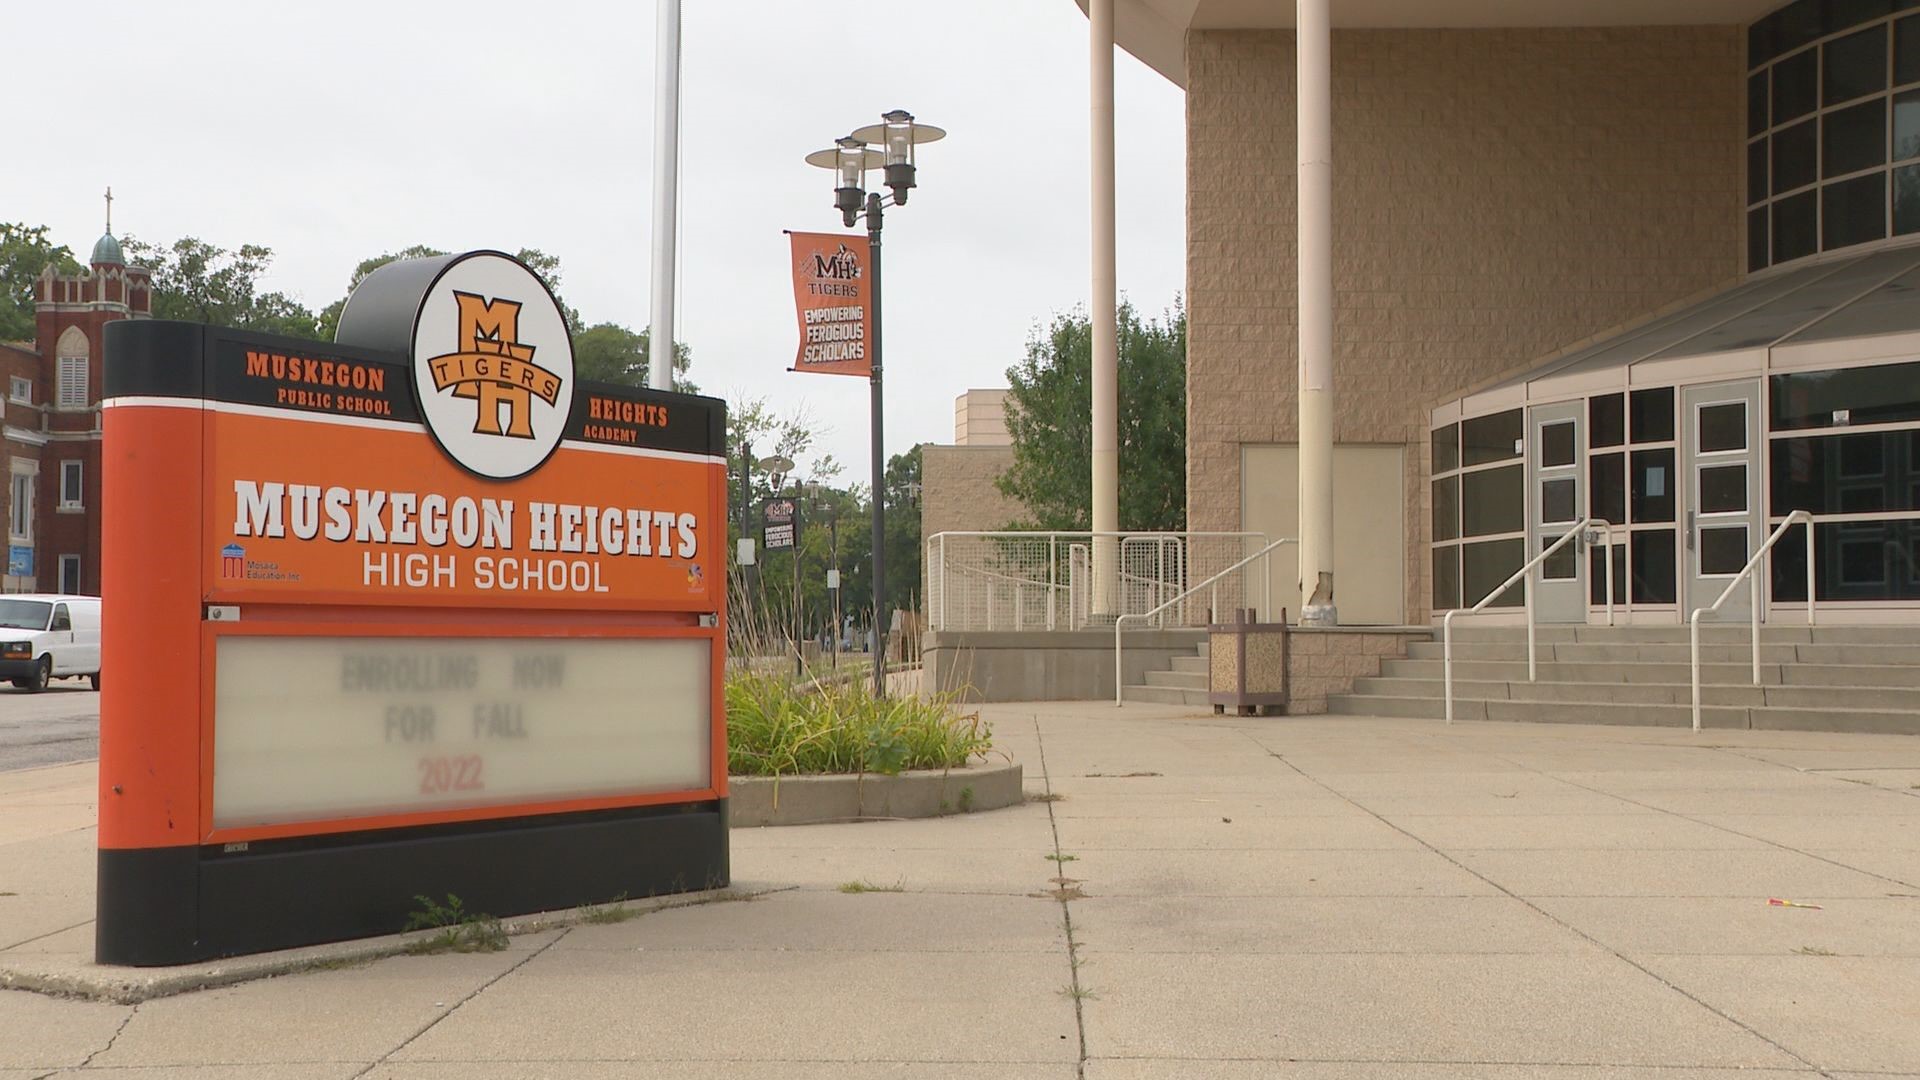 Parents of students who attend Muskegon Heights High School are concerned over a lack of teachers, curriculum and transparency in the school district.